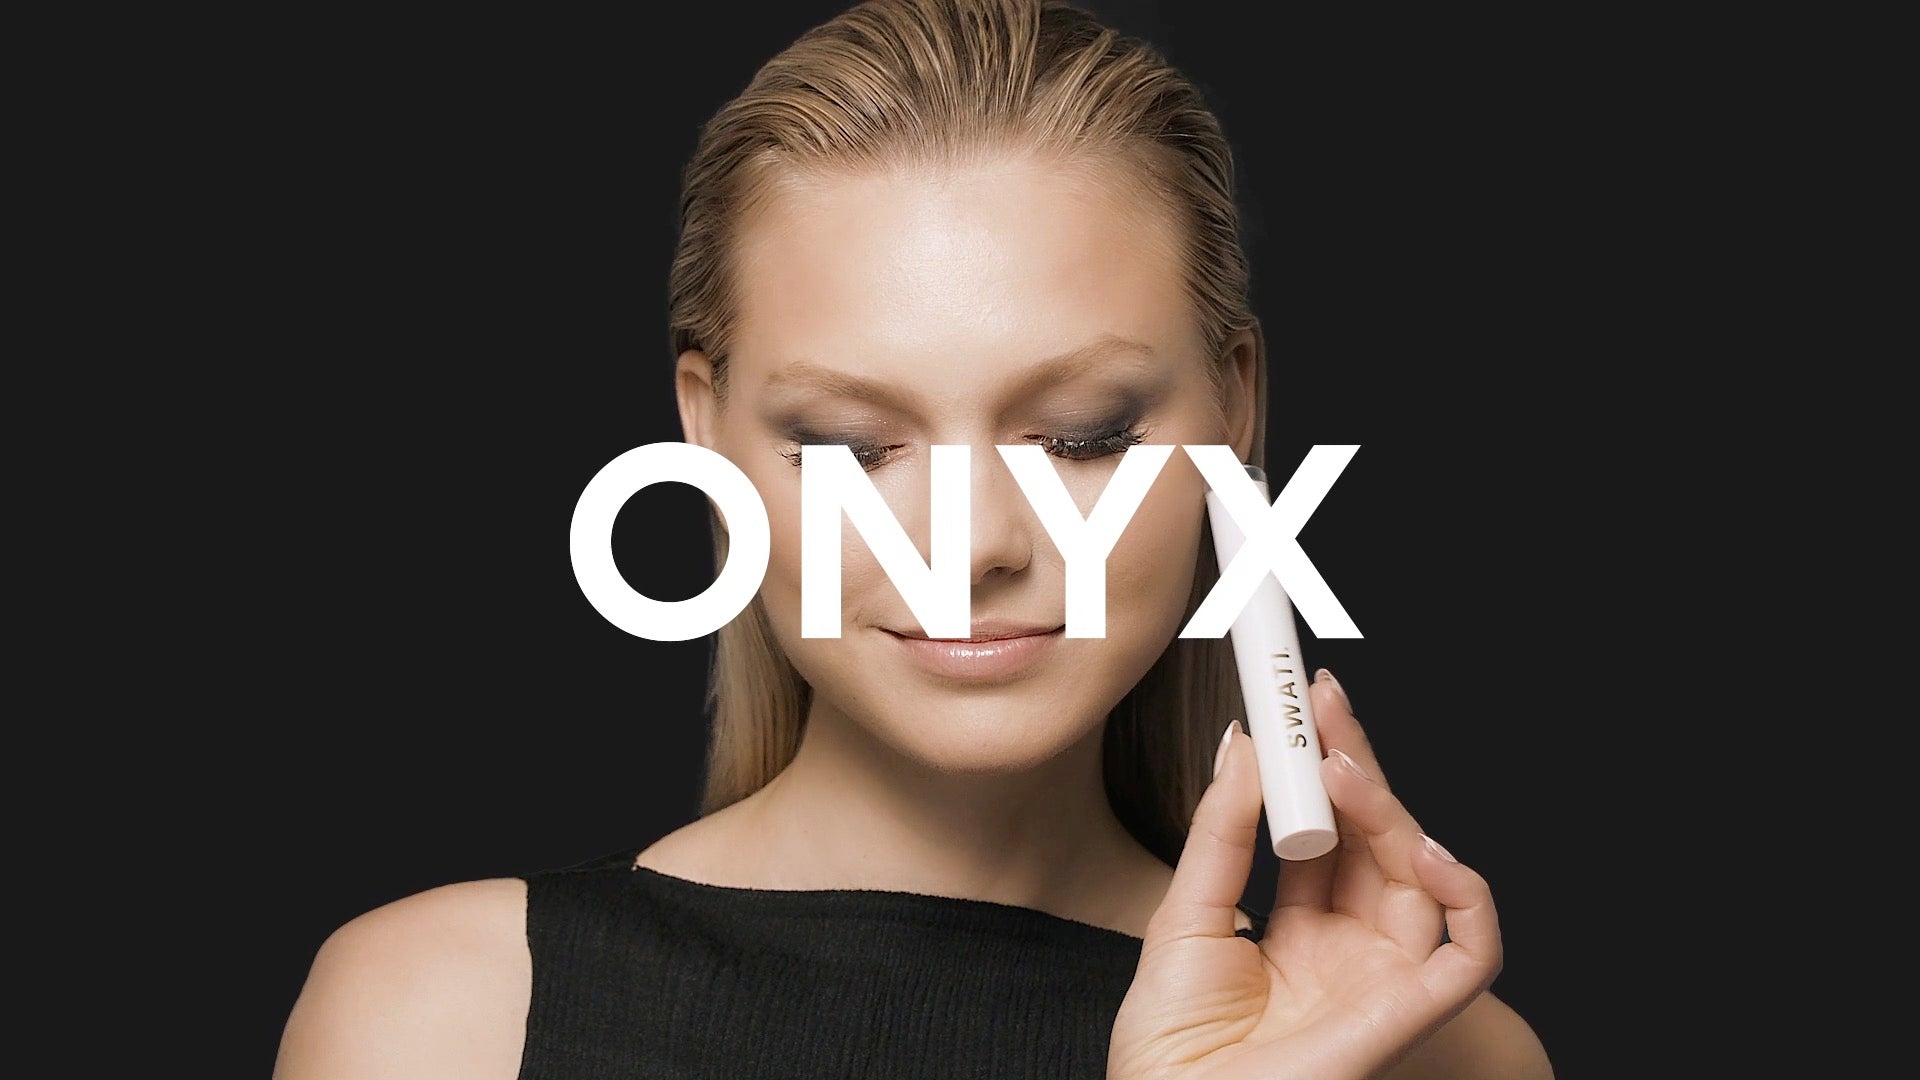 Load video: Lash booster Onyx mascara launch video